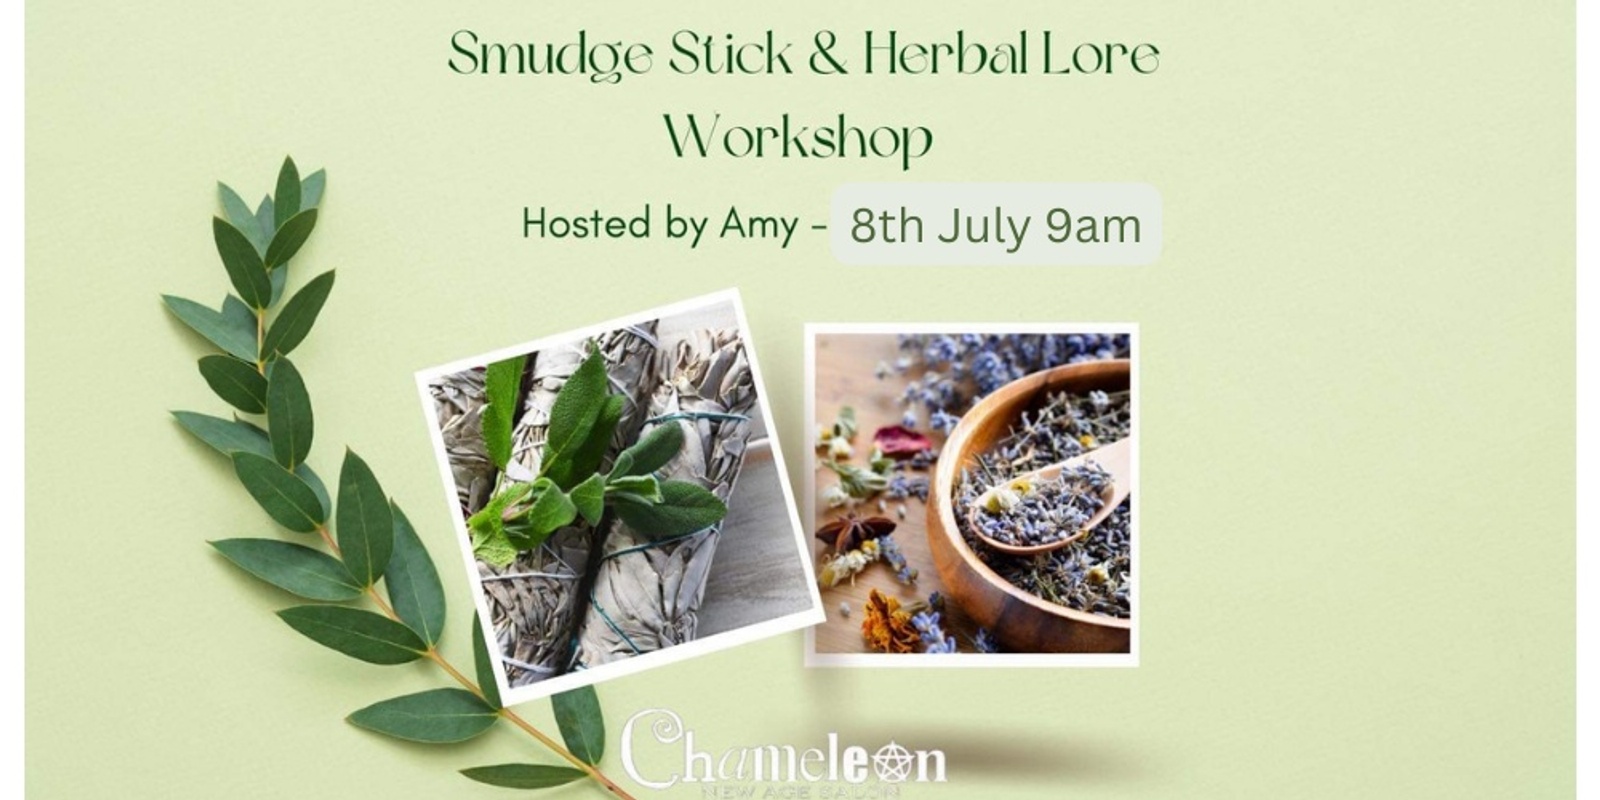 Smudge Stick and Herbal Lore Workshop